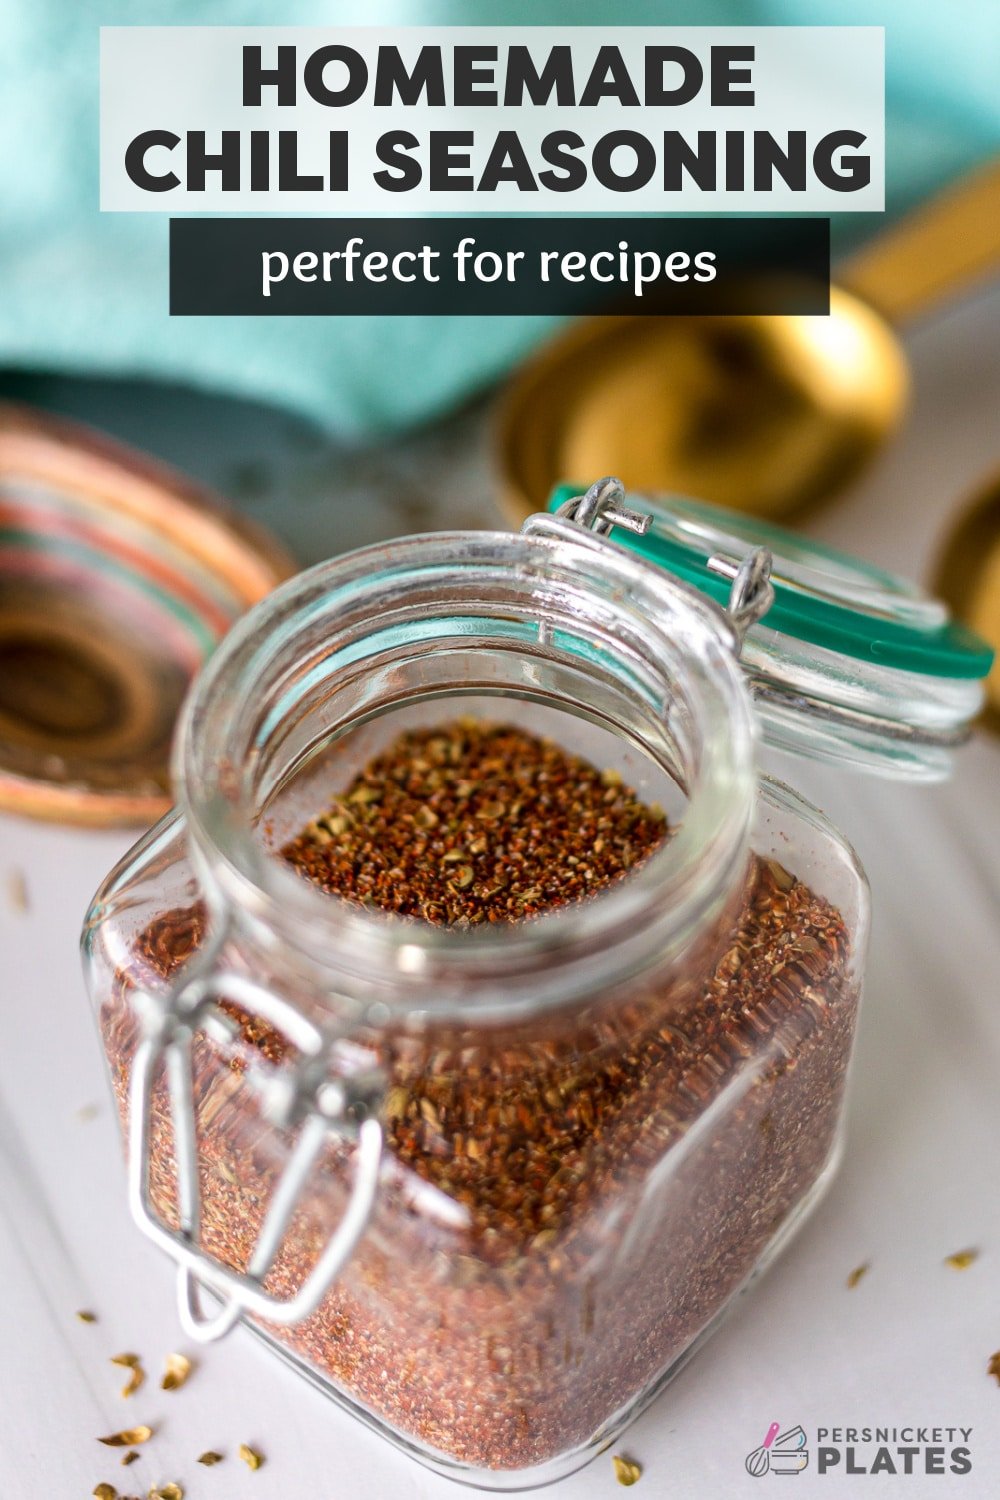 Learn to make homemade chili seasoning with just a few pantry spices and a minute to combine! Homemade spice mixes are budget-friendly, easily accessible, and customizable to suit your tastes. Plus, they add so much flavor to all your dishes without the need for extra sodium and fillers!  | www.persnicketyplates.com